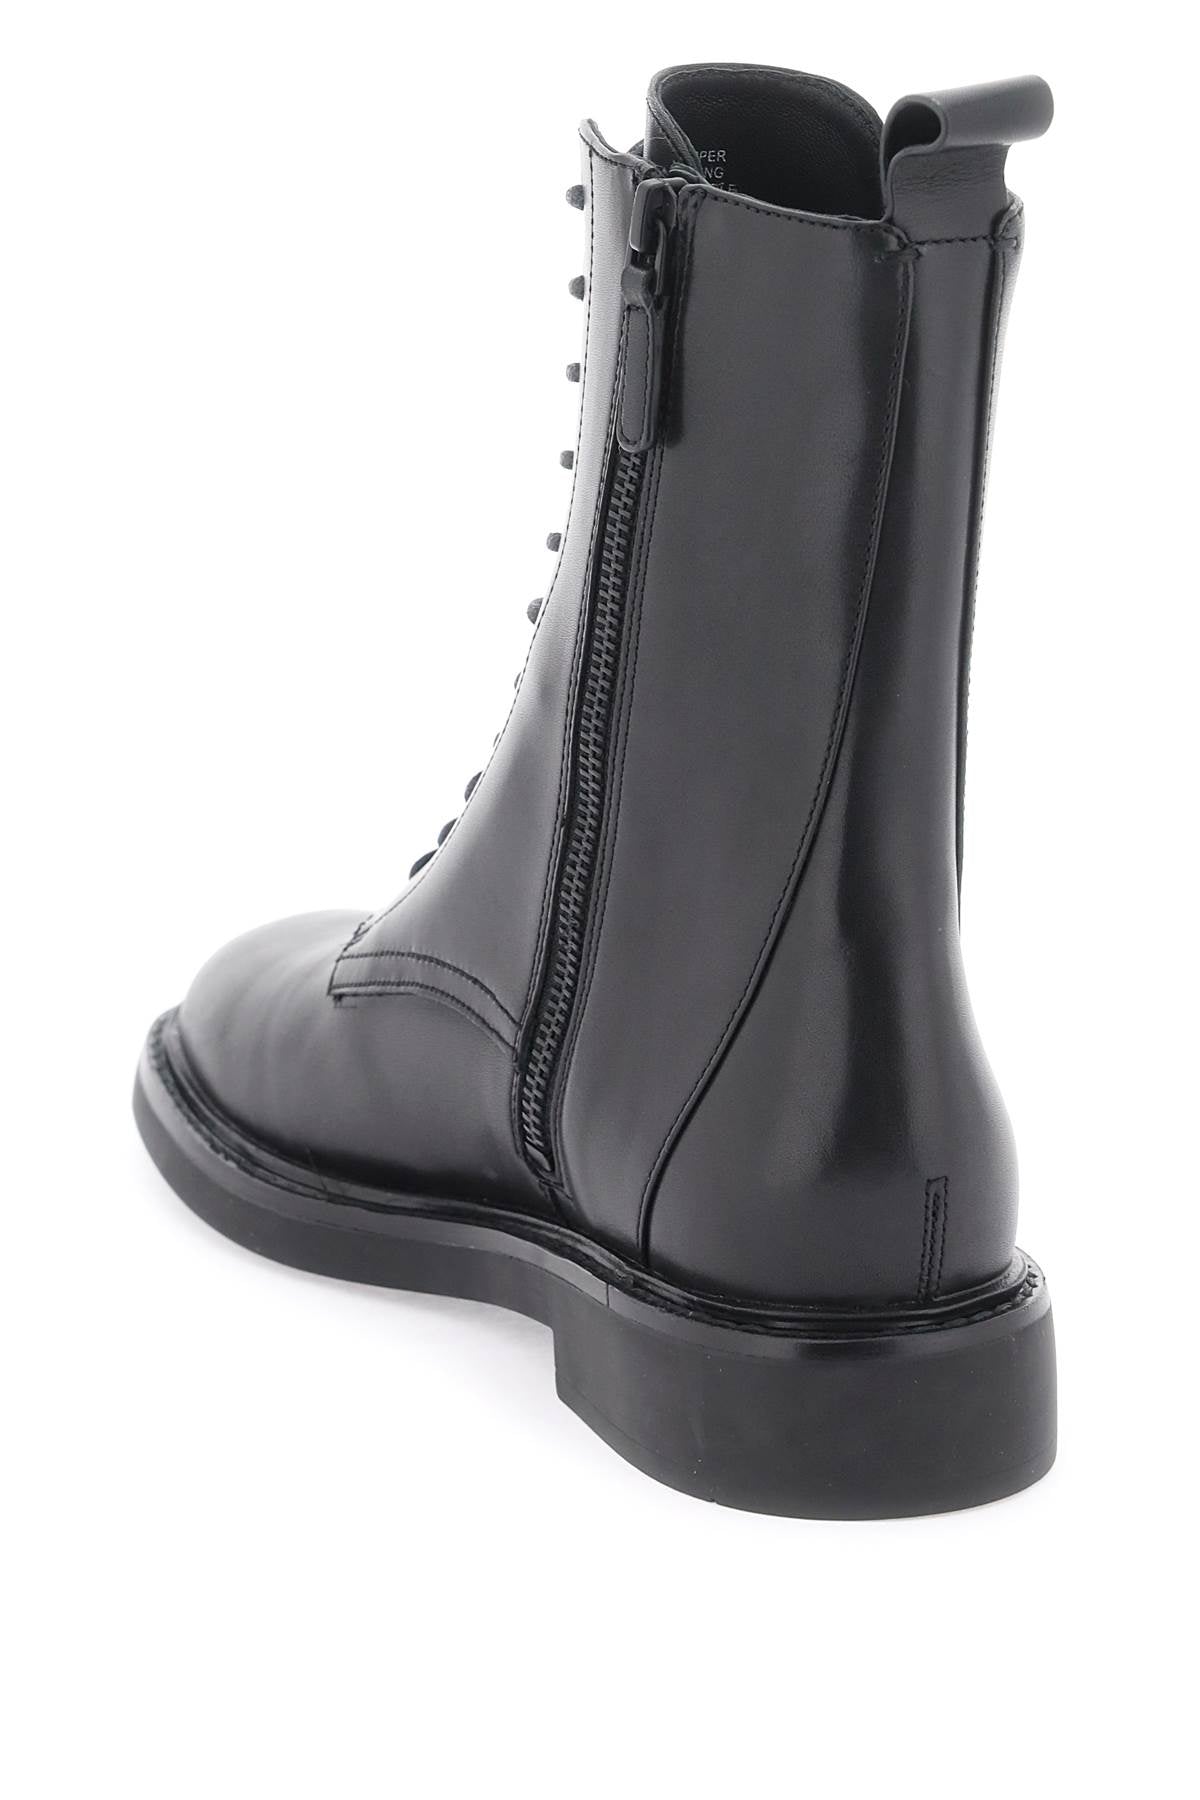 TORY BURCH Iconic Black Leather Combat Boots for Women